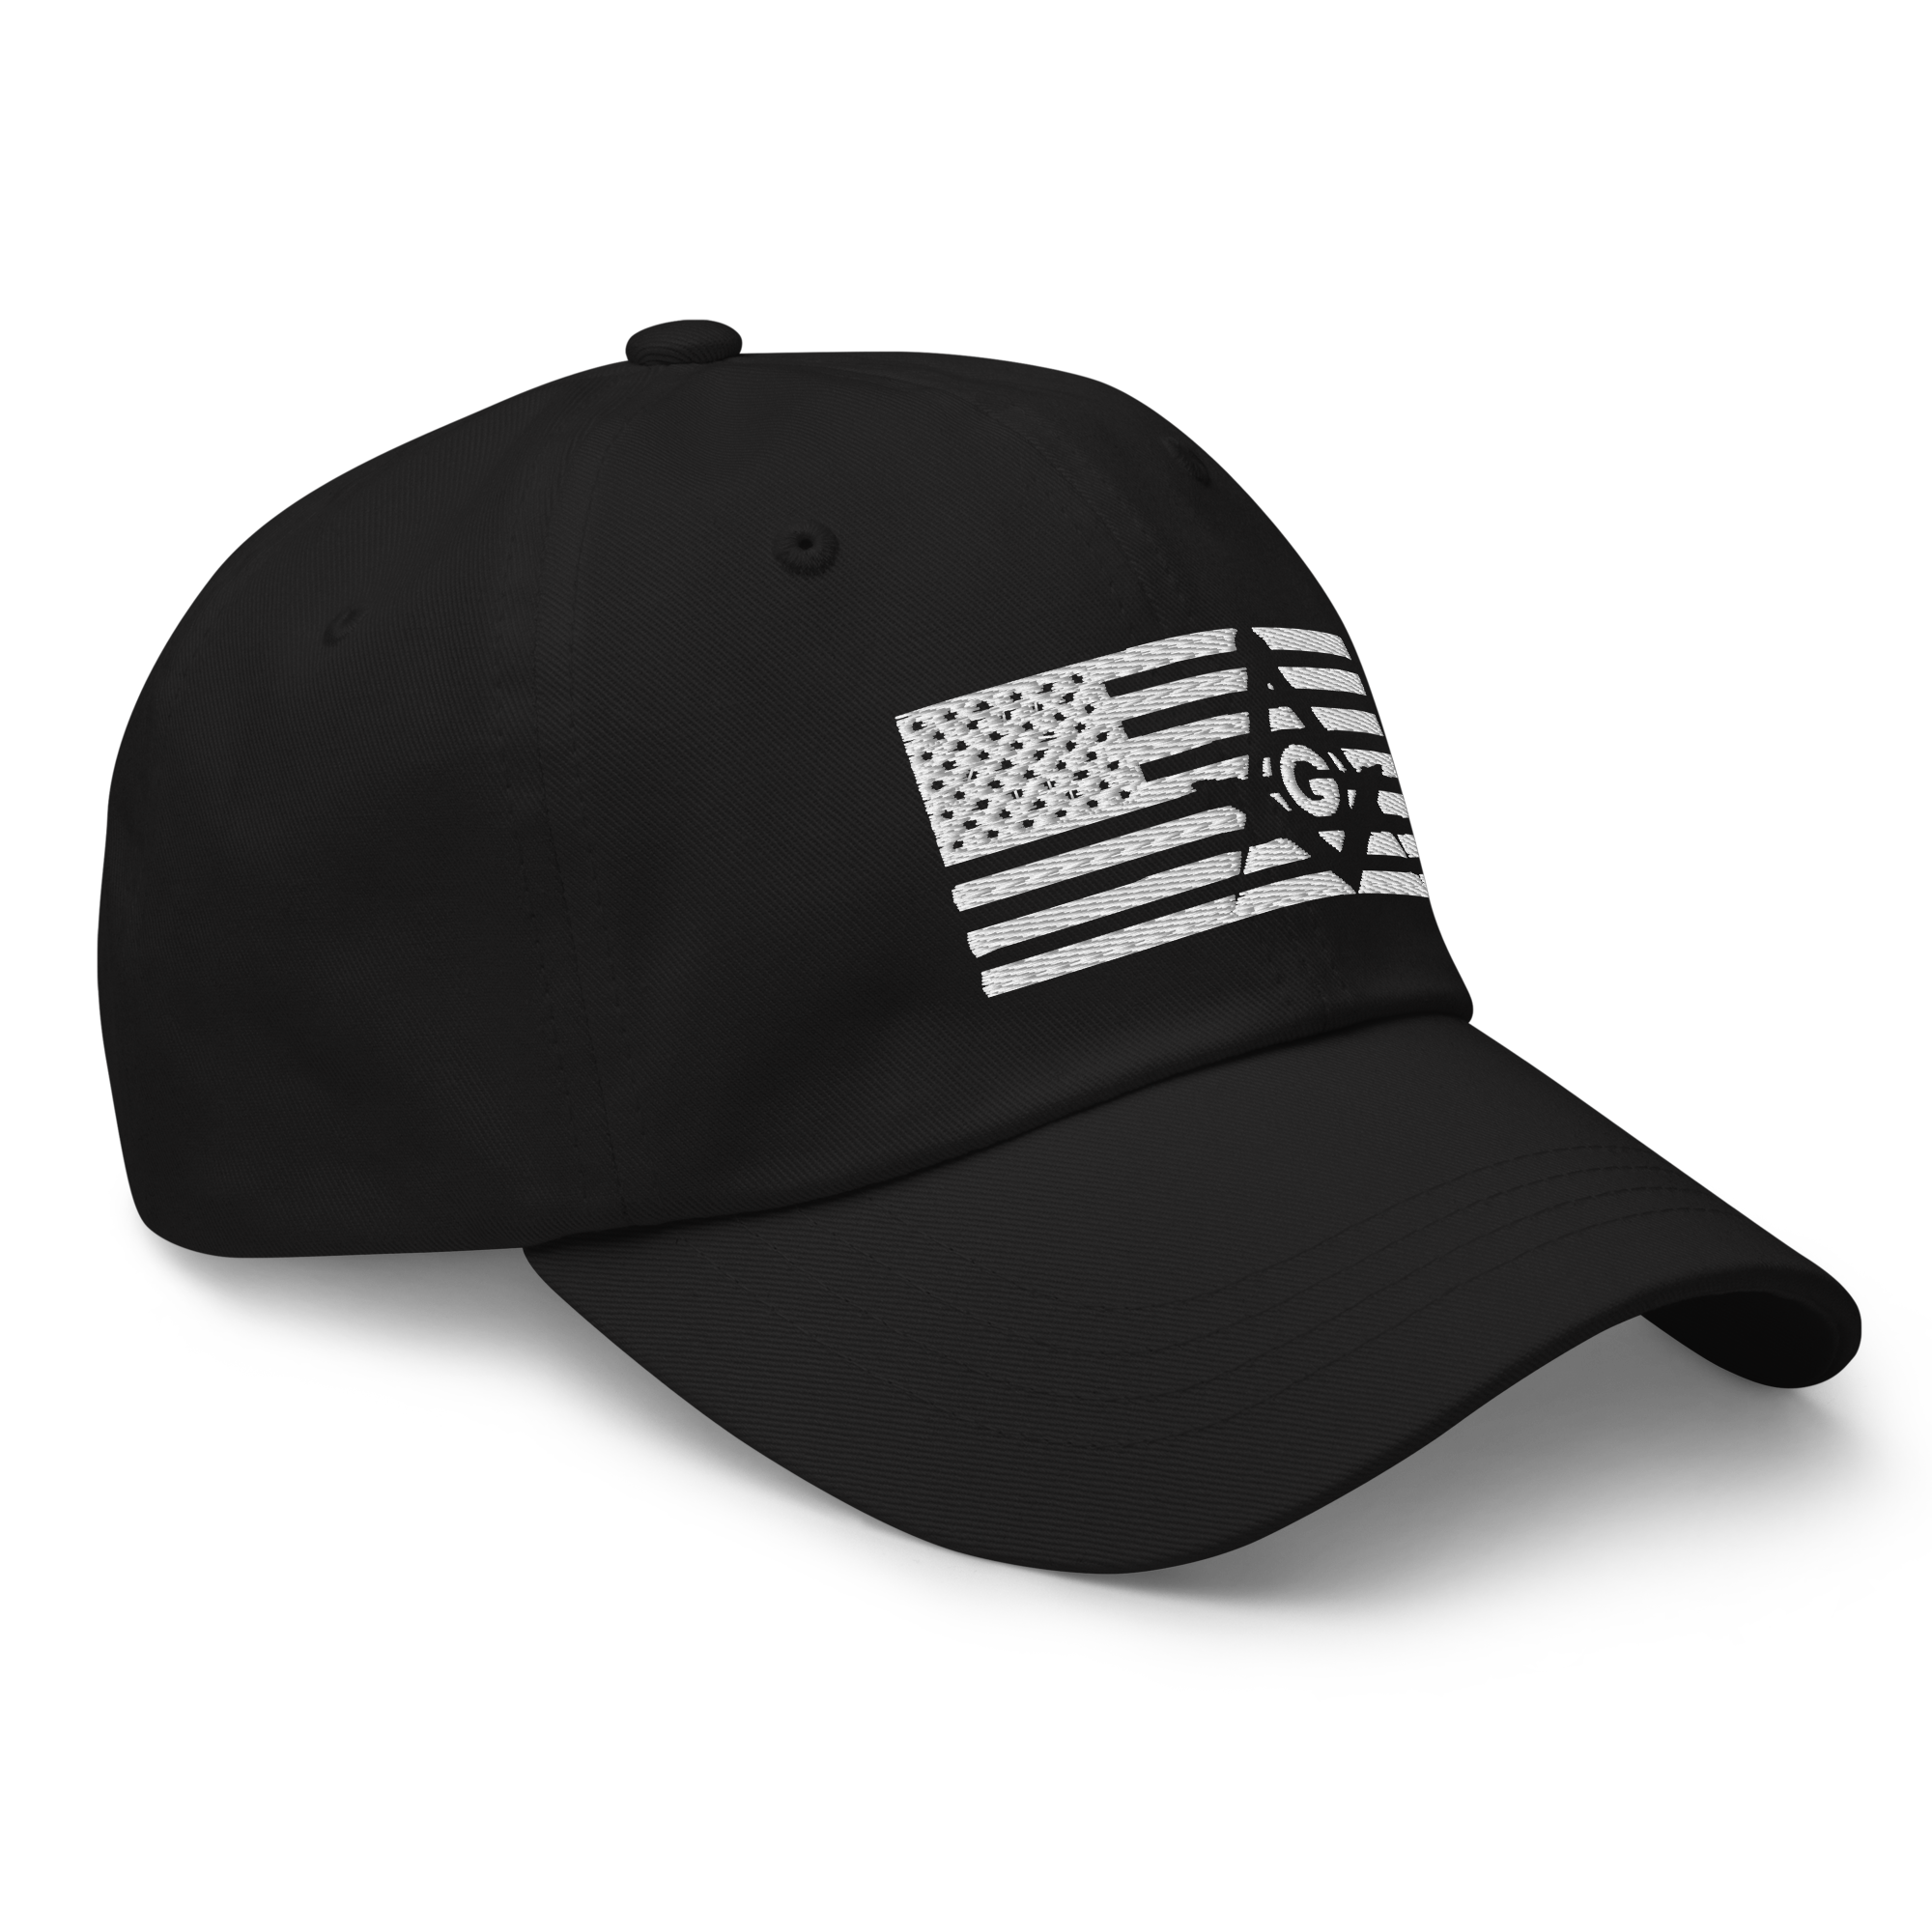 Square and Compass with G and Flag Classic Dad Hat